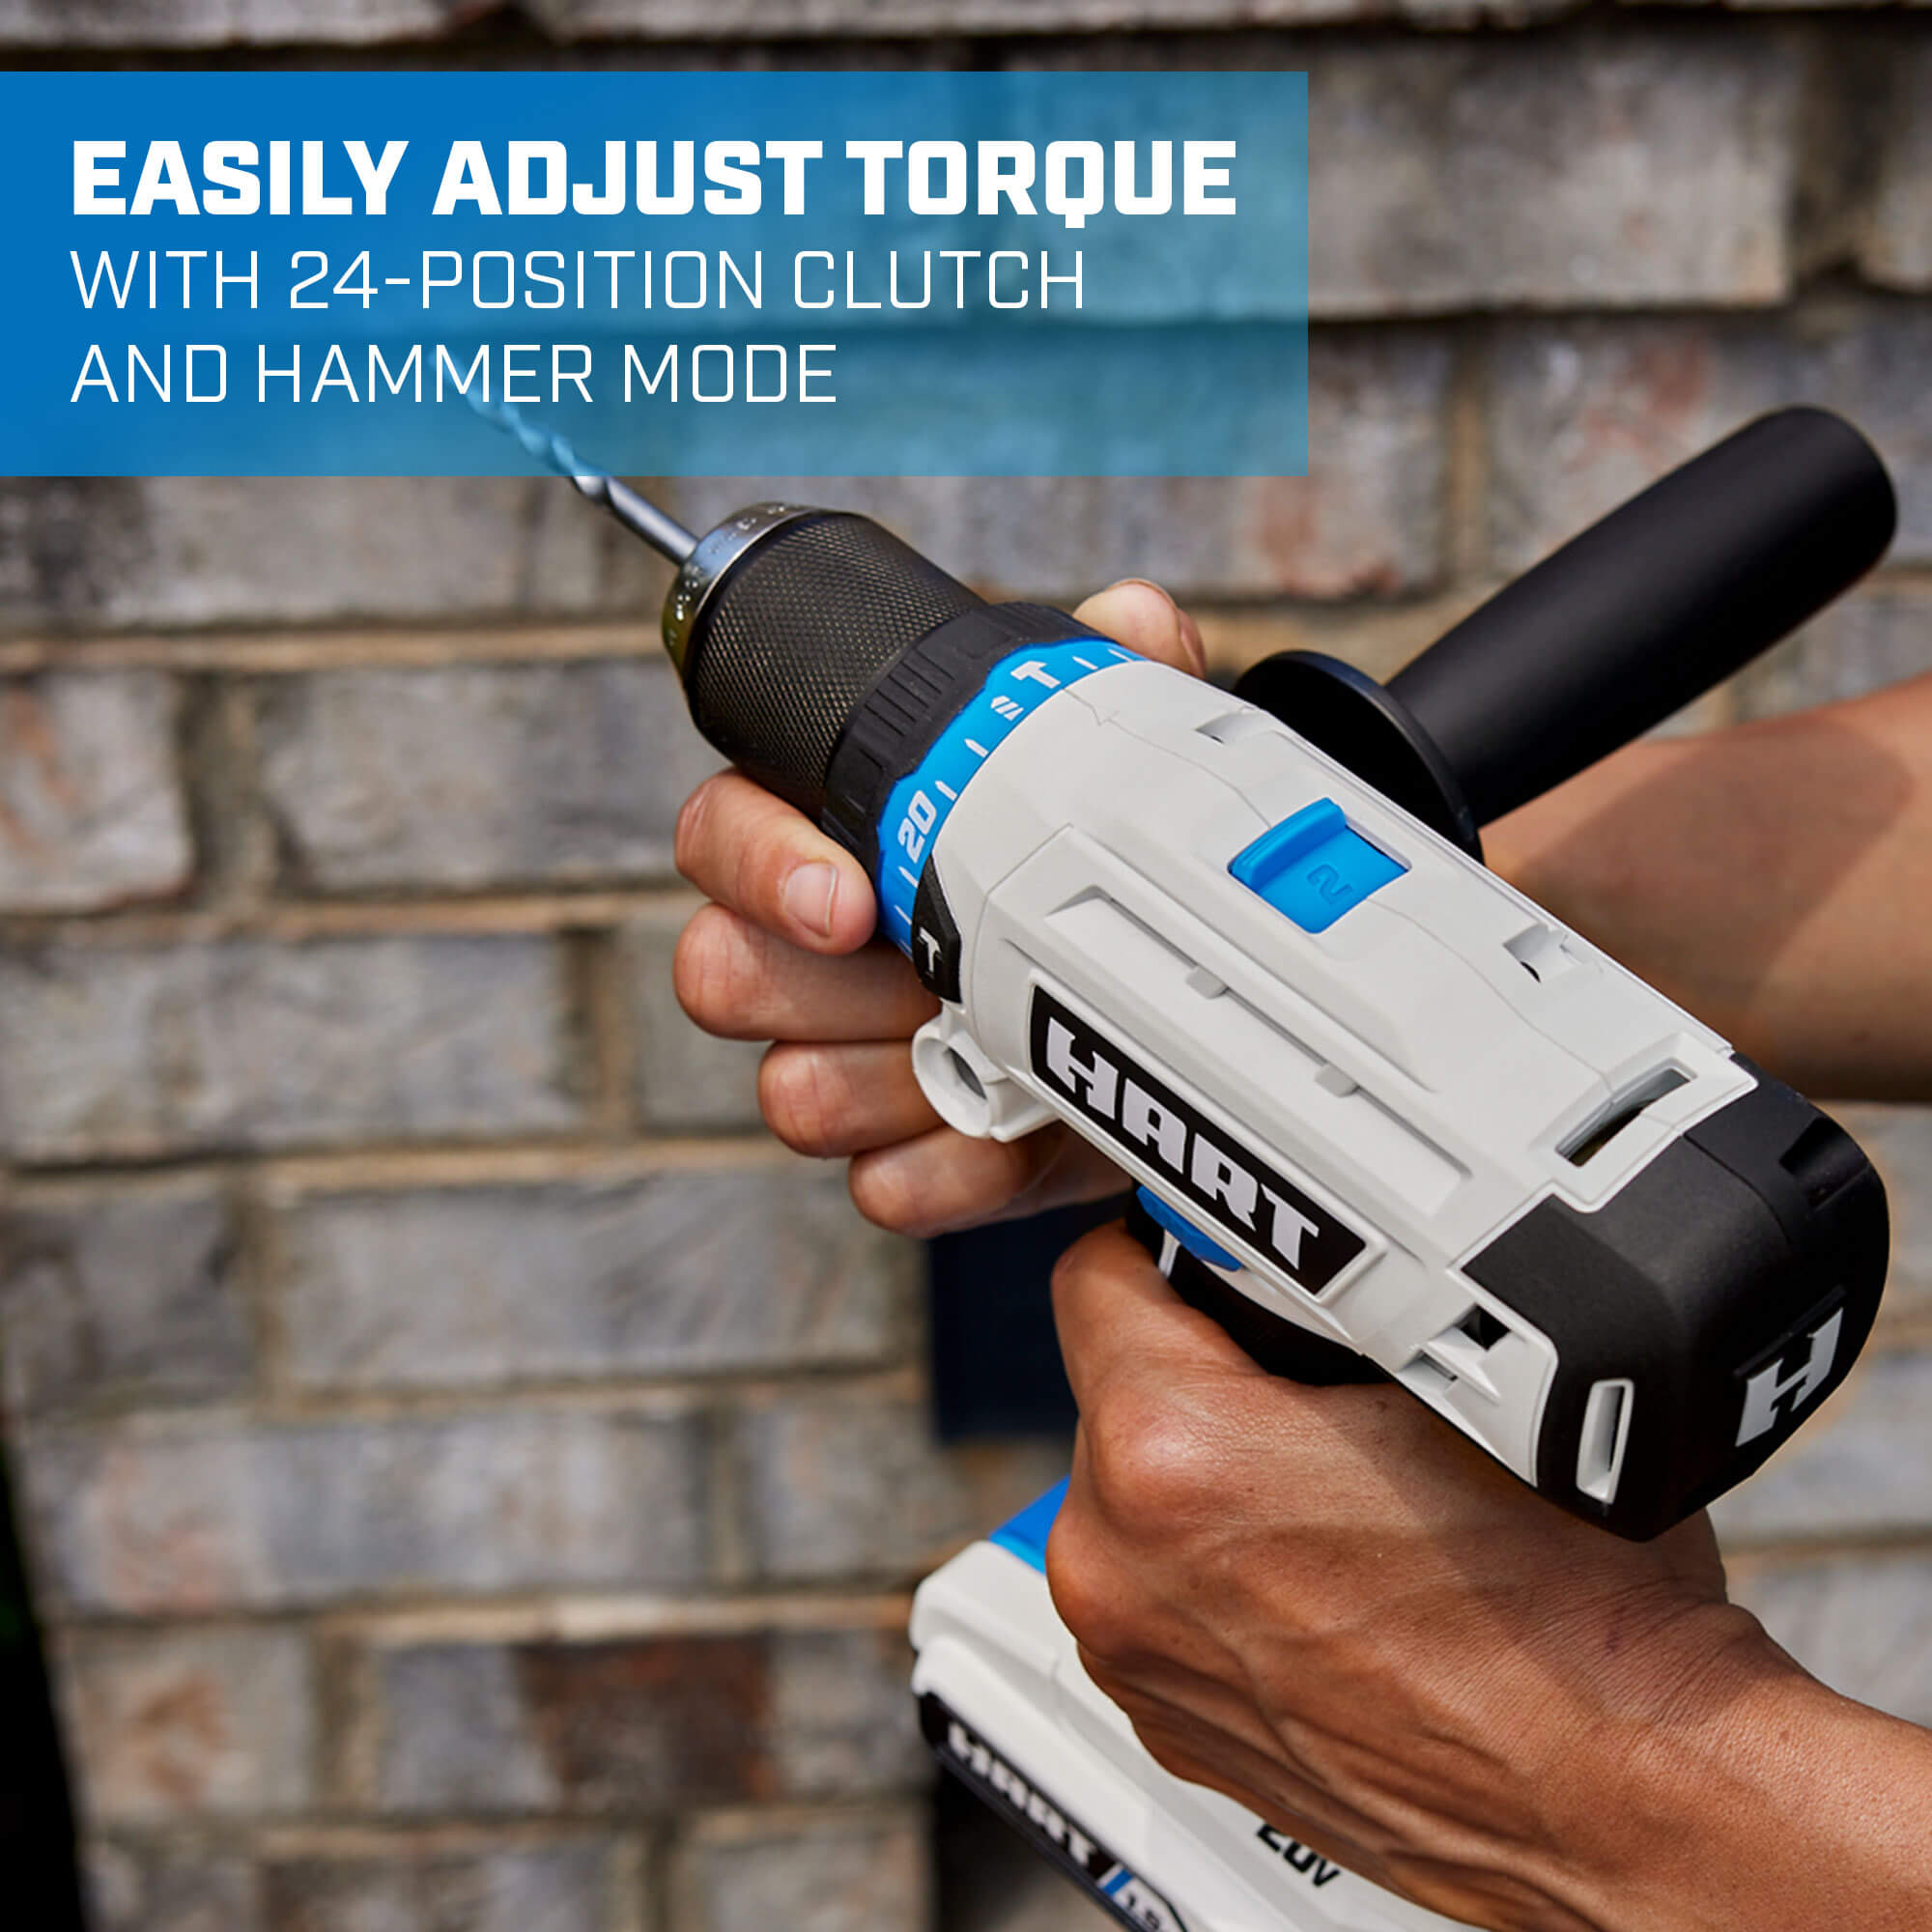 Easily Adjust Torque with 24-position clutch and hammer mode